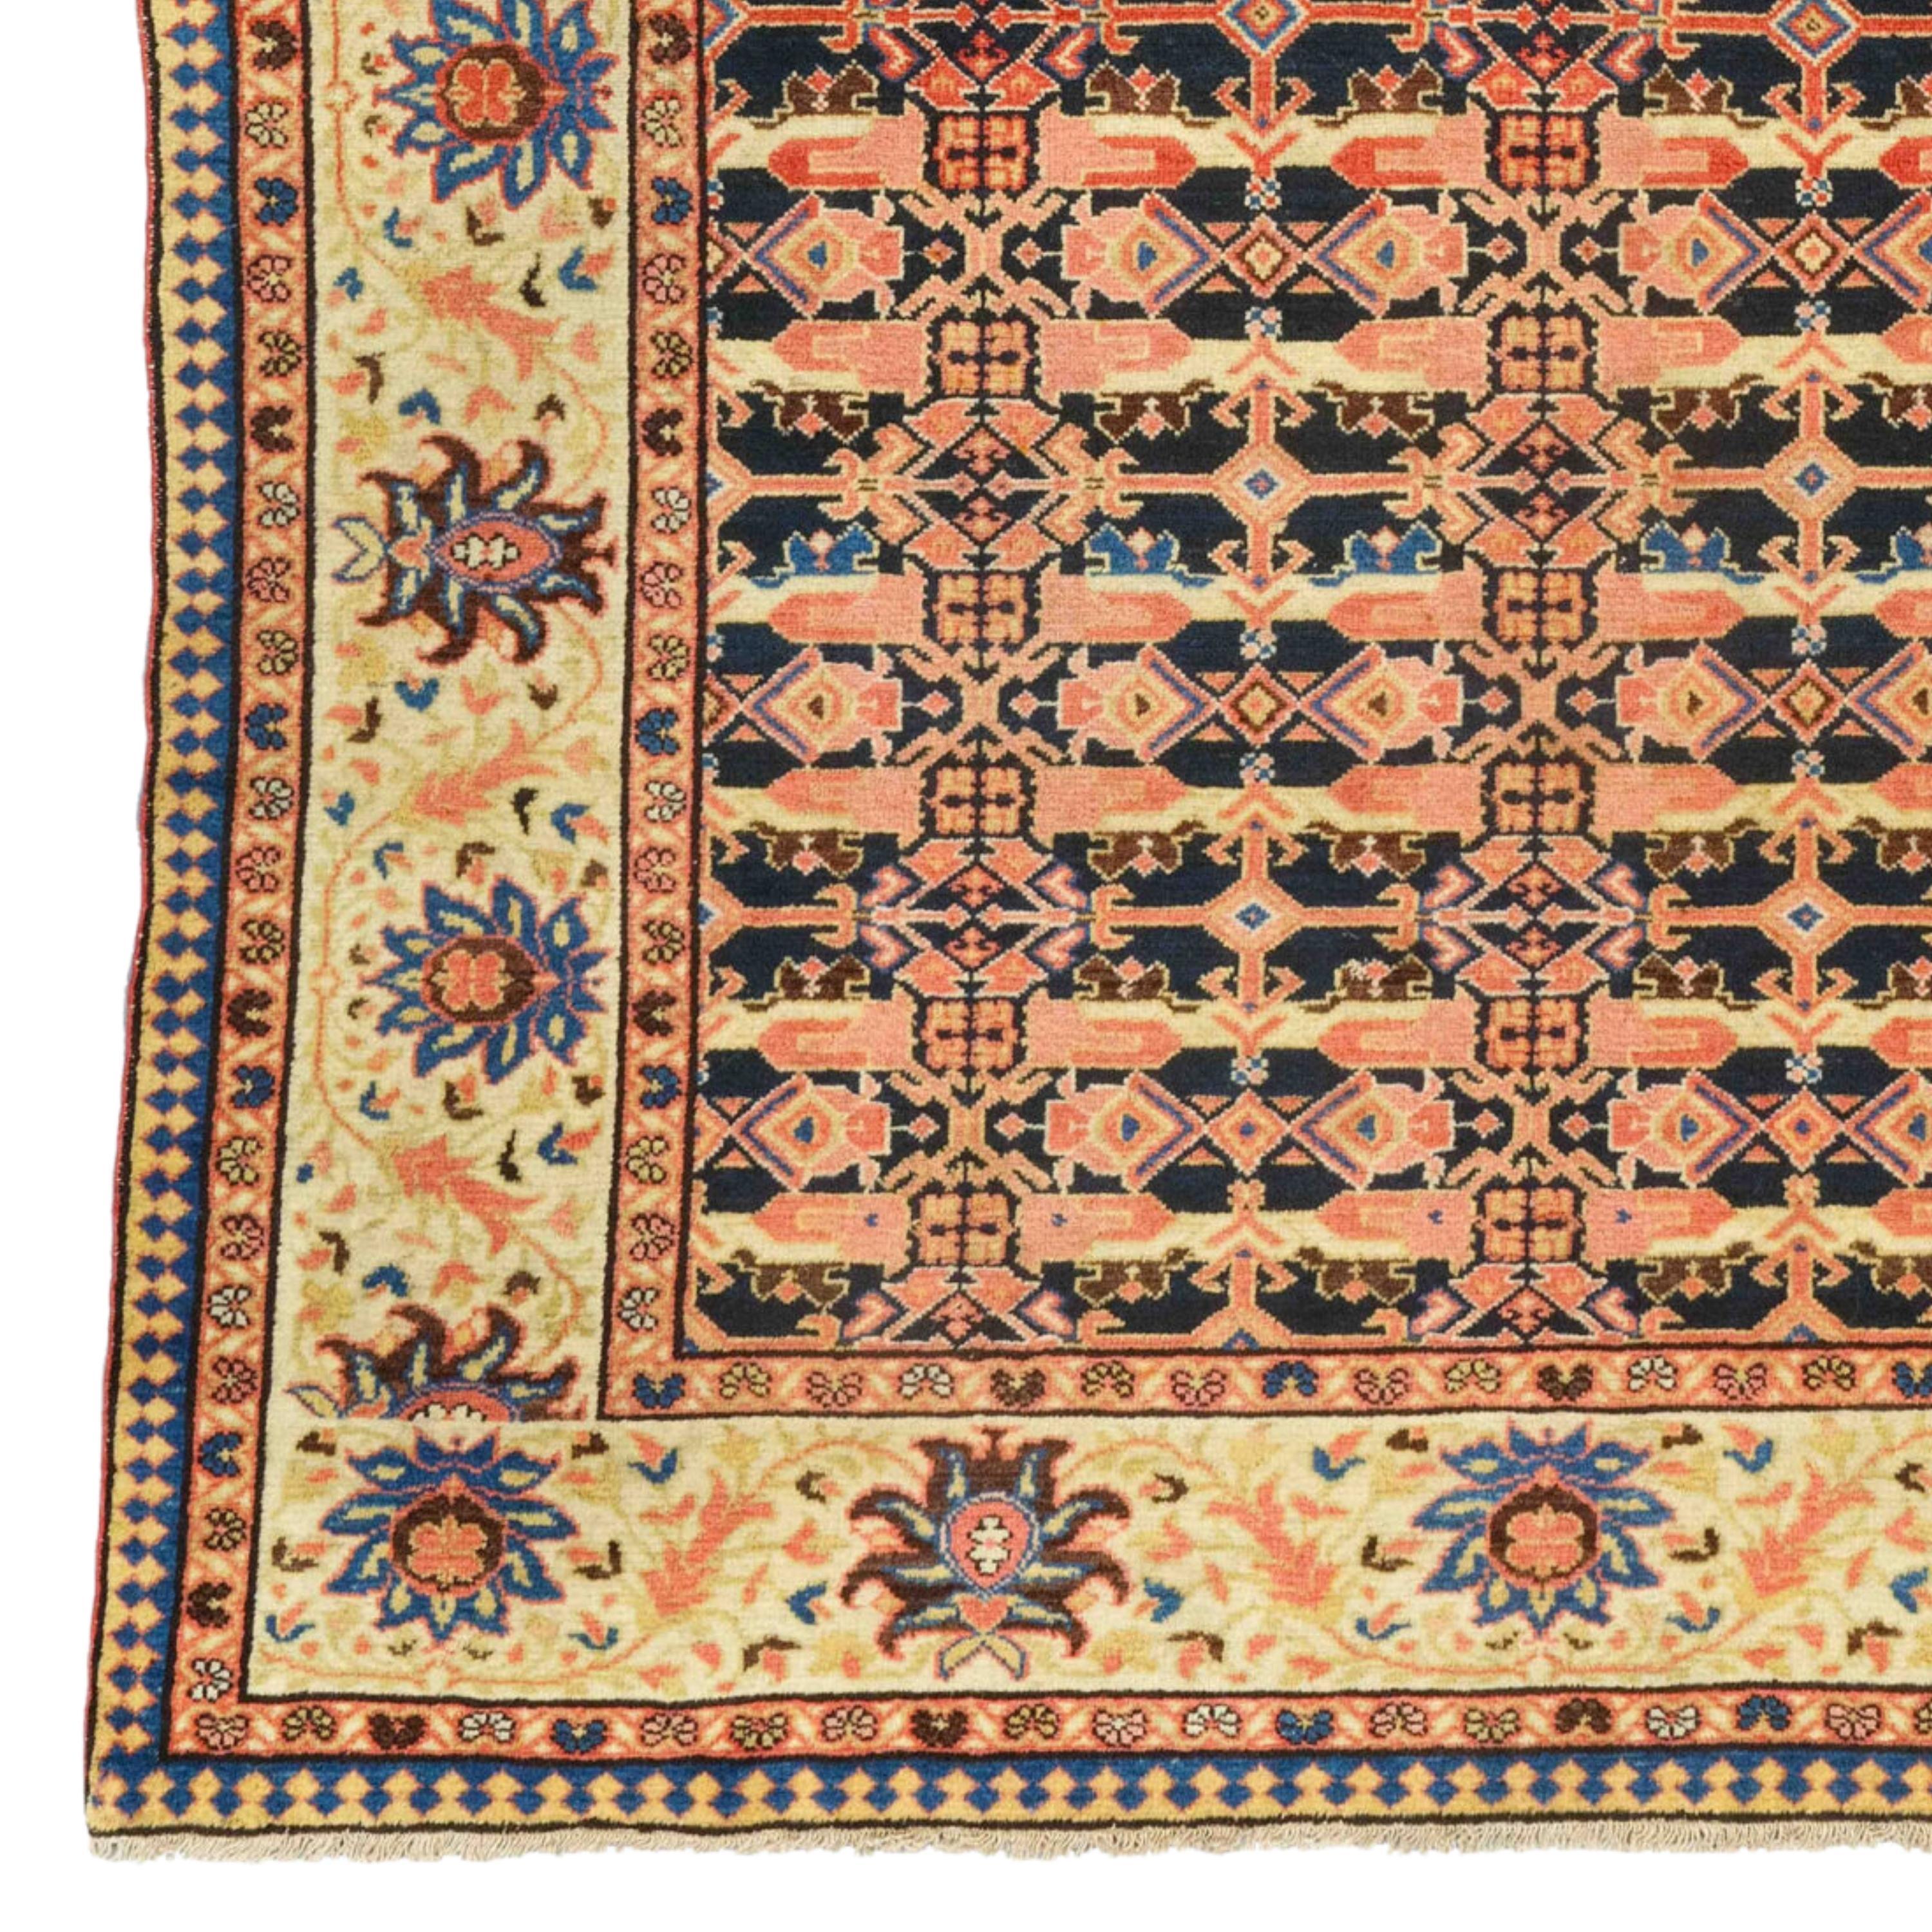 Antique Ferahan Rug
Late 19th Century Ferahan Rug in Perfect Condition
Size 135 x 200 cm (53,1x78,7 In)

This elegant late 19th century antique Ferahan carpet will increase the elegance of your home with its rich history and sophisticated design.